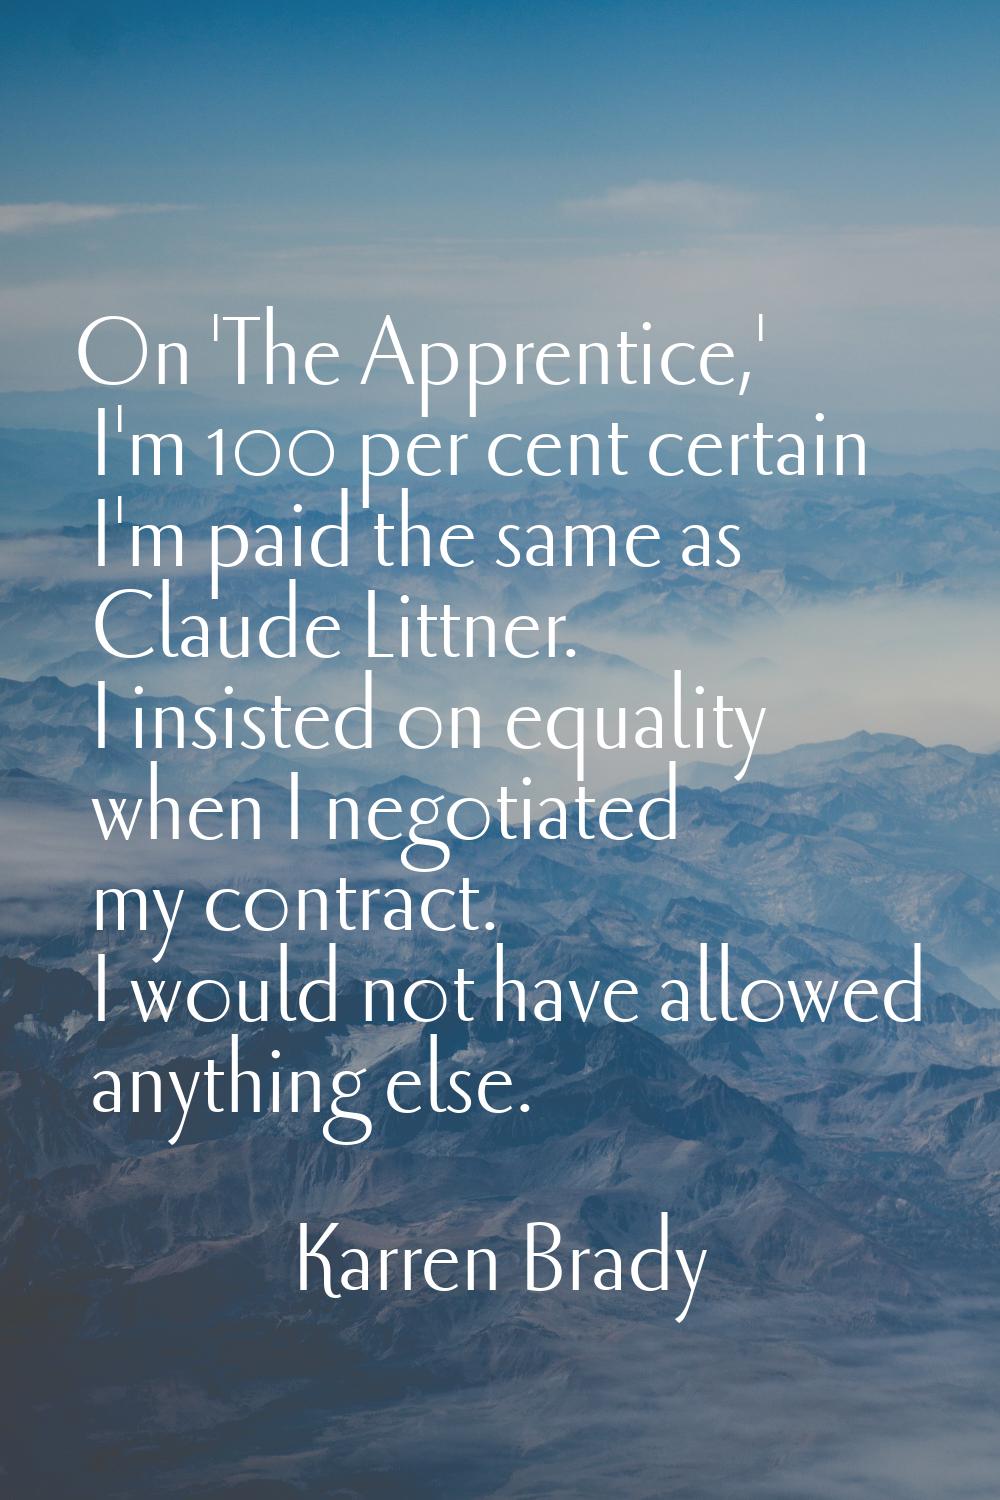 On 'The Apprentice,' I'm 100 per cent certain I'm paid the same as Claude Littner. I insisted on eq